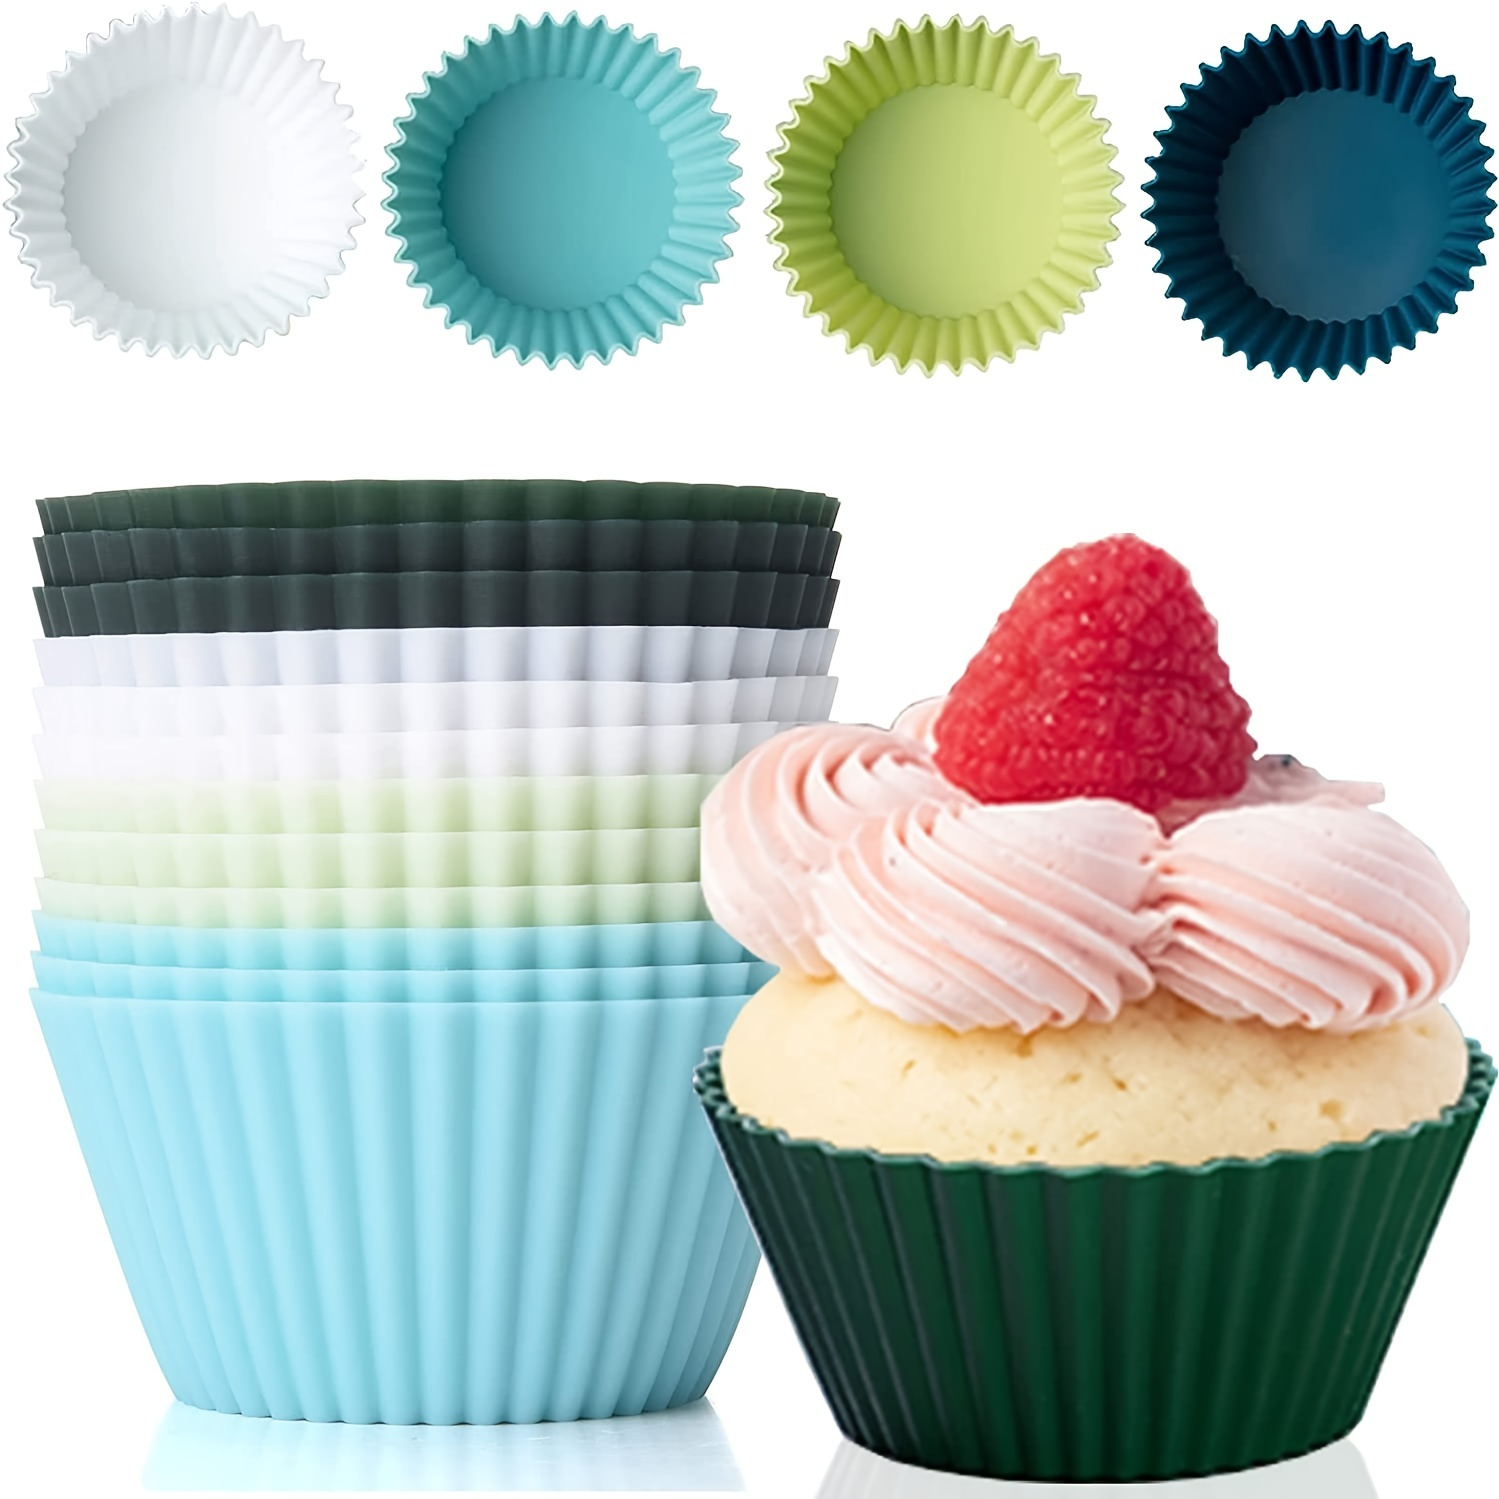 Yirtree Silicone Cupcake Liners Reusable Baking Cups Nonstick Easy Clean  Pastry Muffin Molds 6/12/24Pcs Silicone Muffin Molds Cupcake Dessert Baking